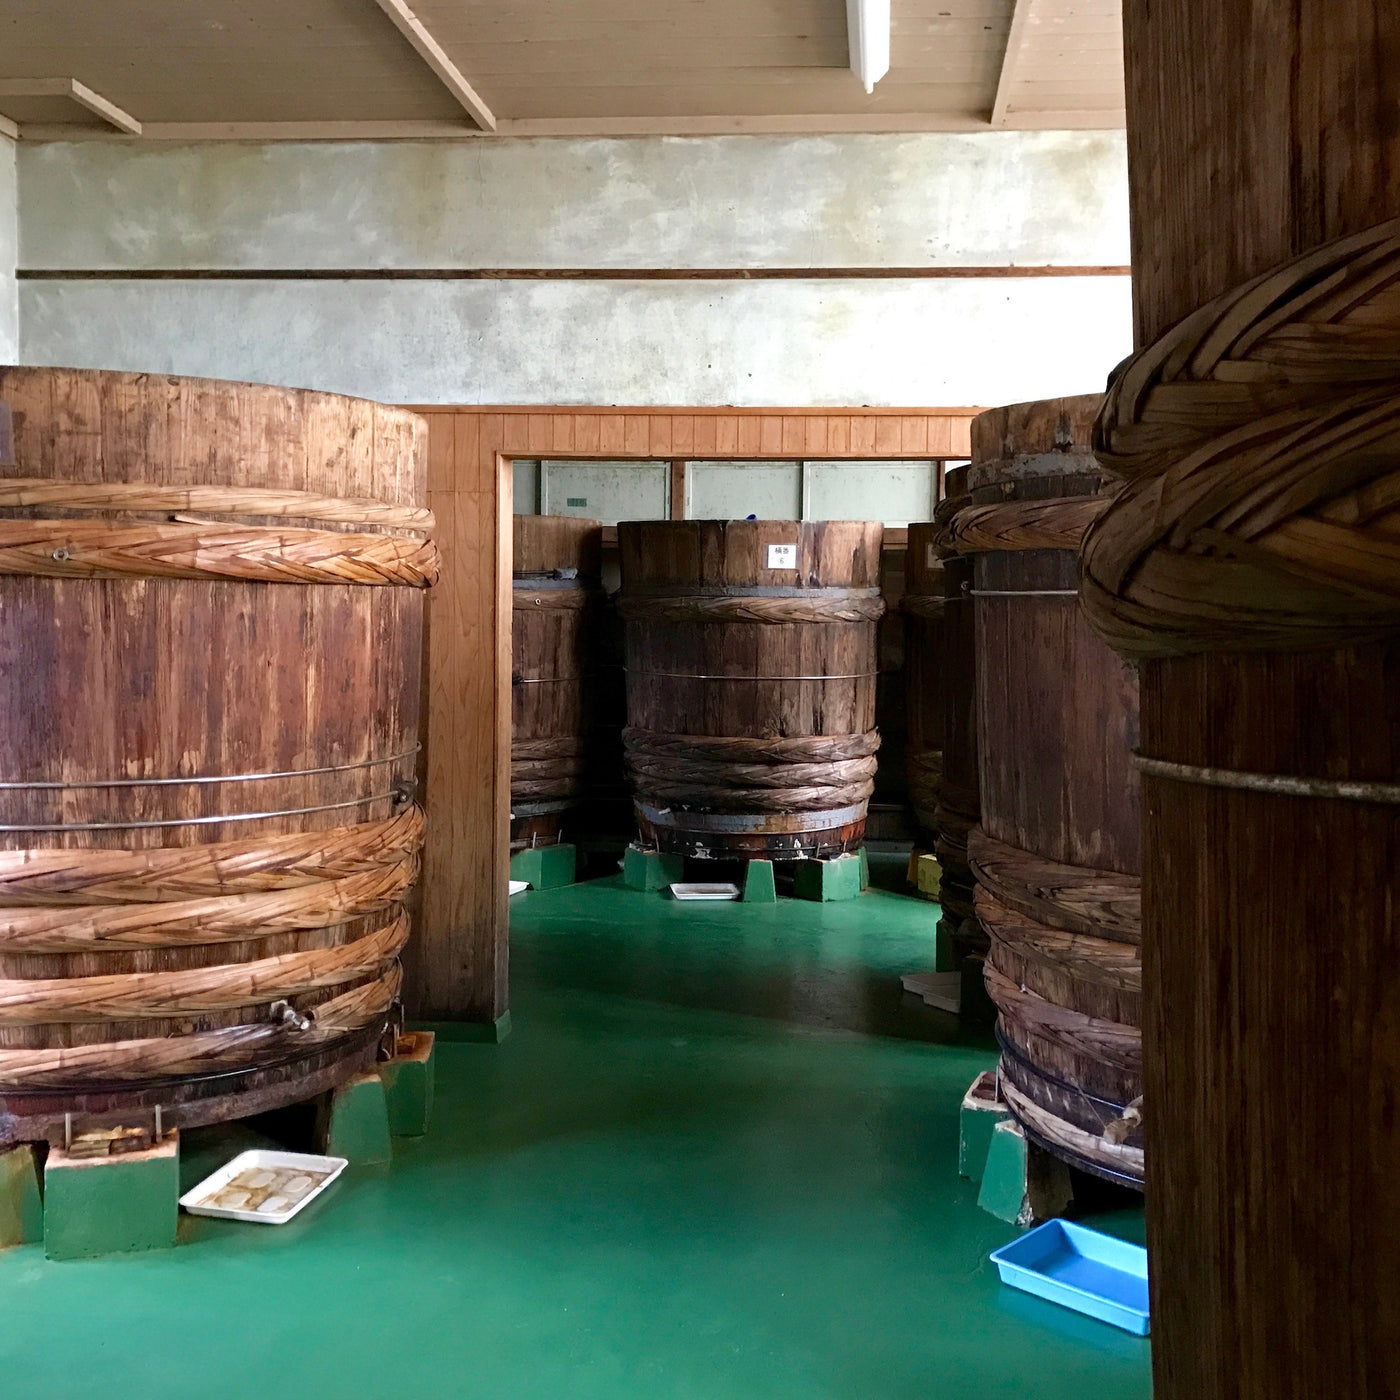 The Importance of Cedar Barrels – it’s what’s in the barrels that counts